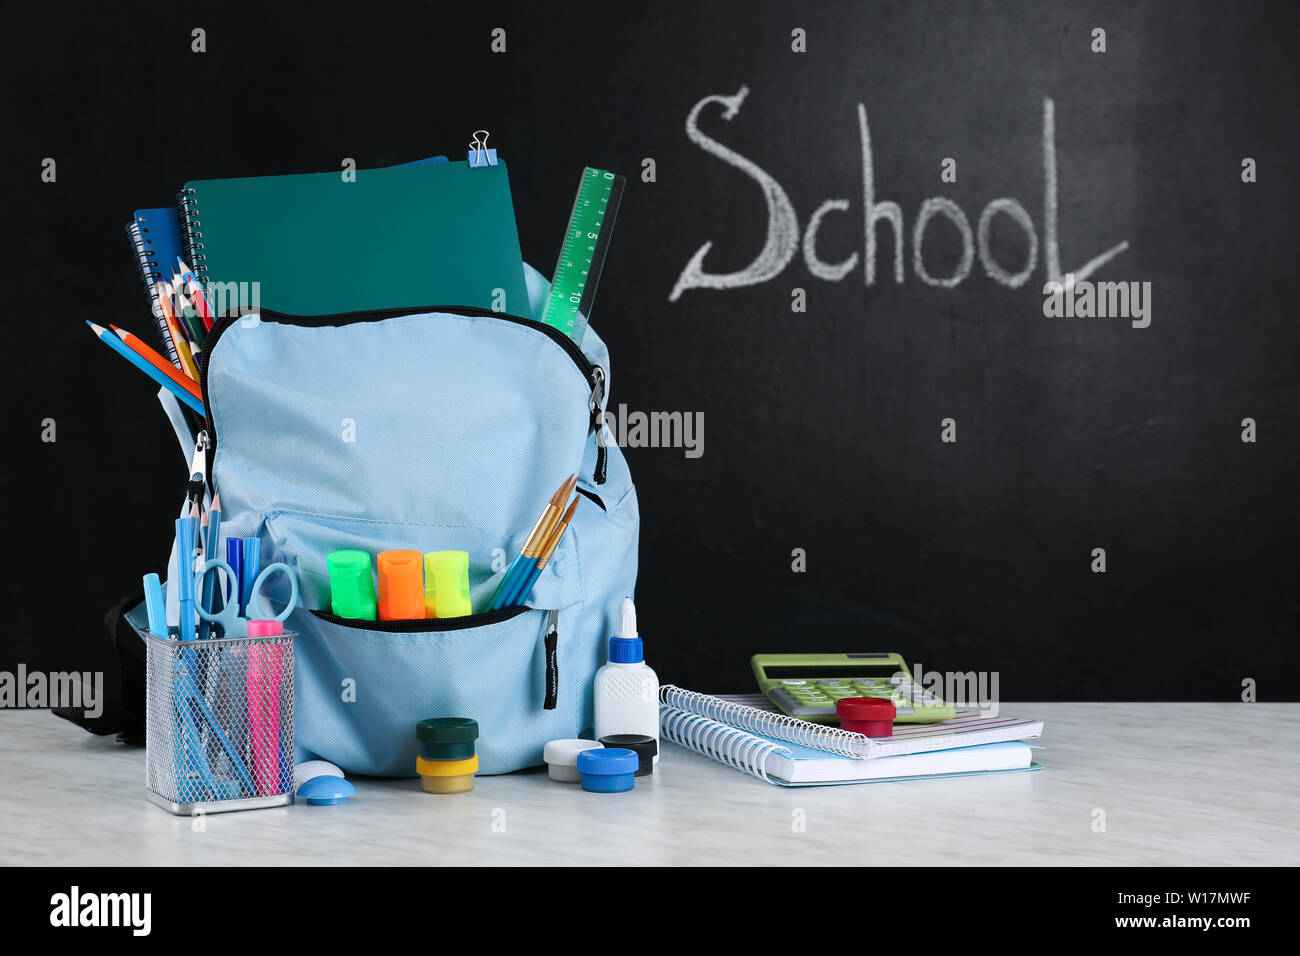 School backpack with stationery on table in classroom Stock Photo